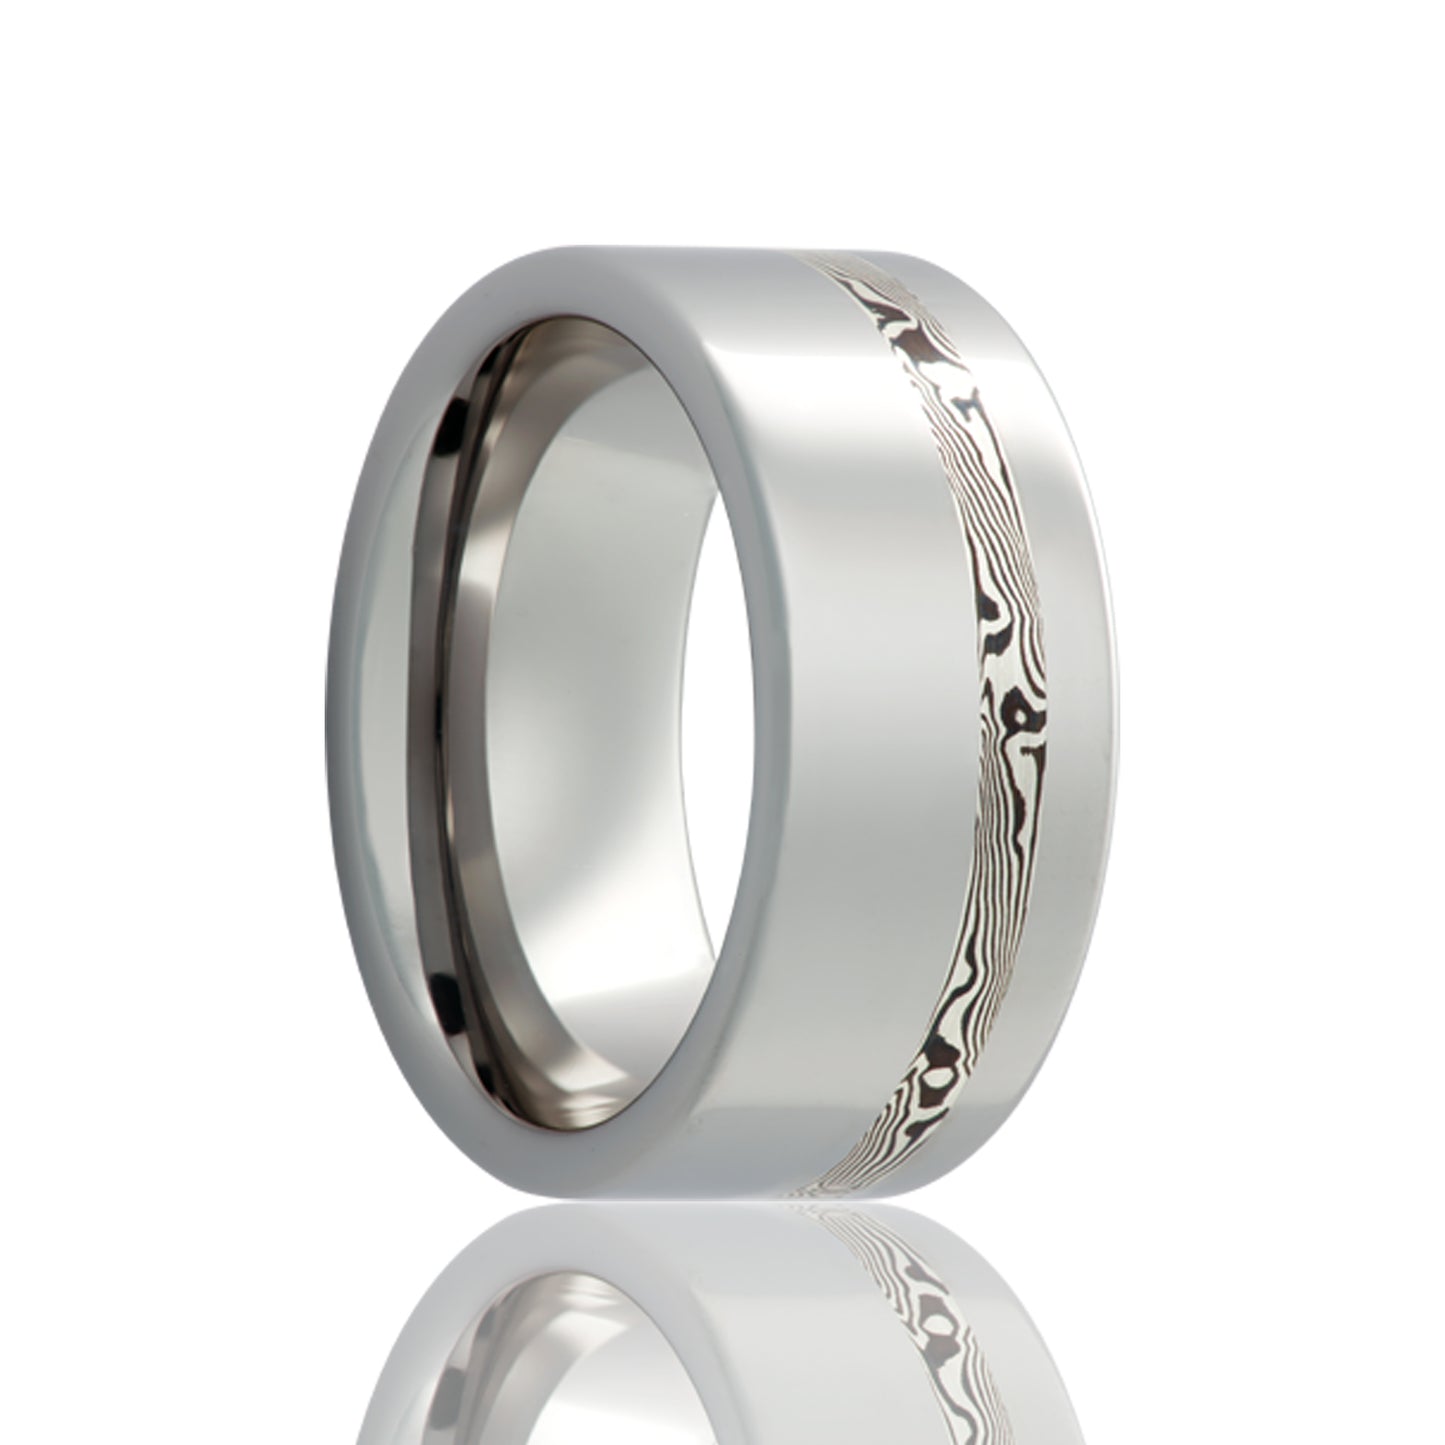 A shakudo & sterling silver mokume gane inlay cobalt wedding band displayed on a neutral white background.